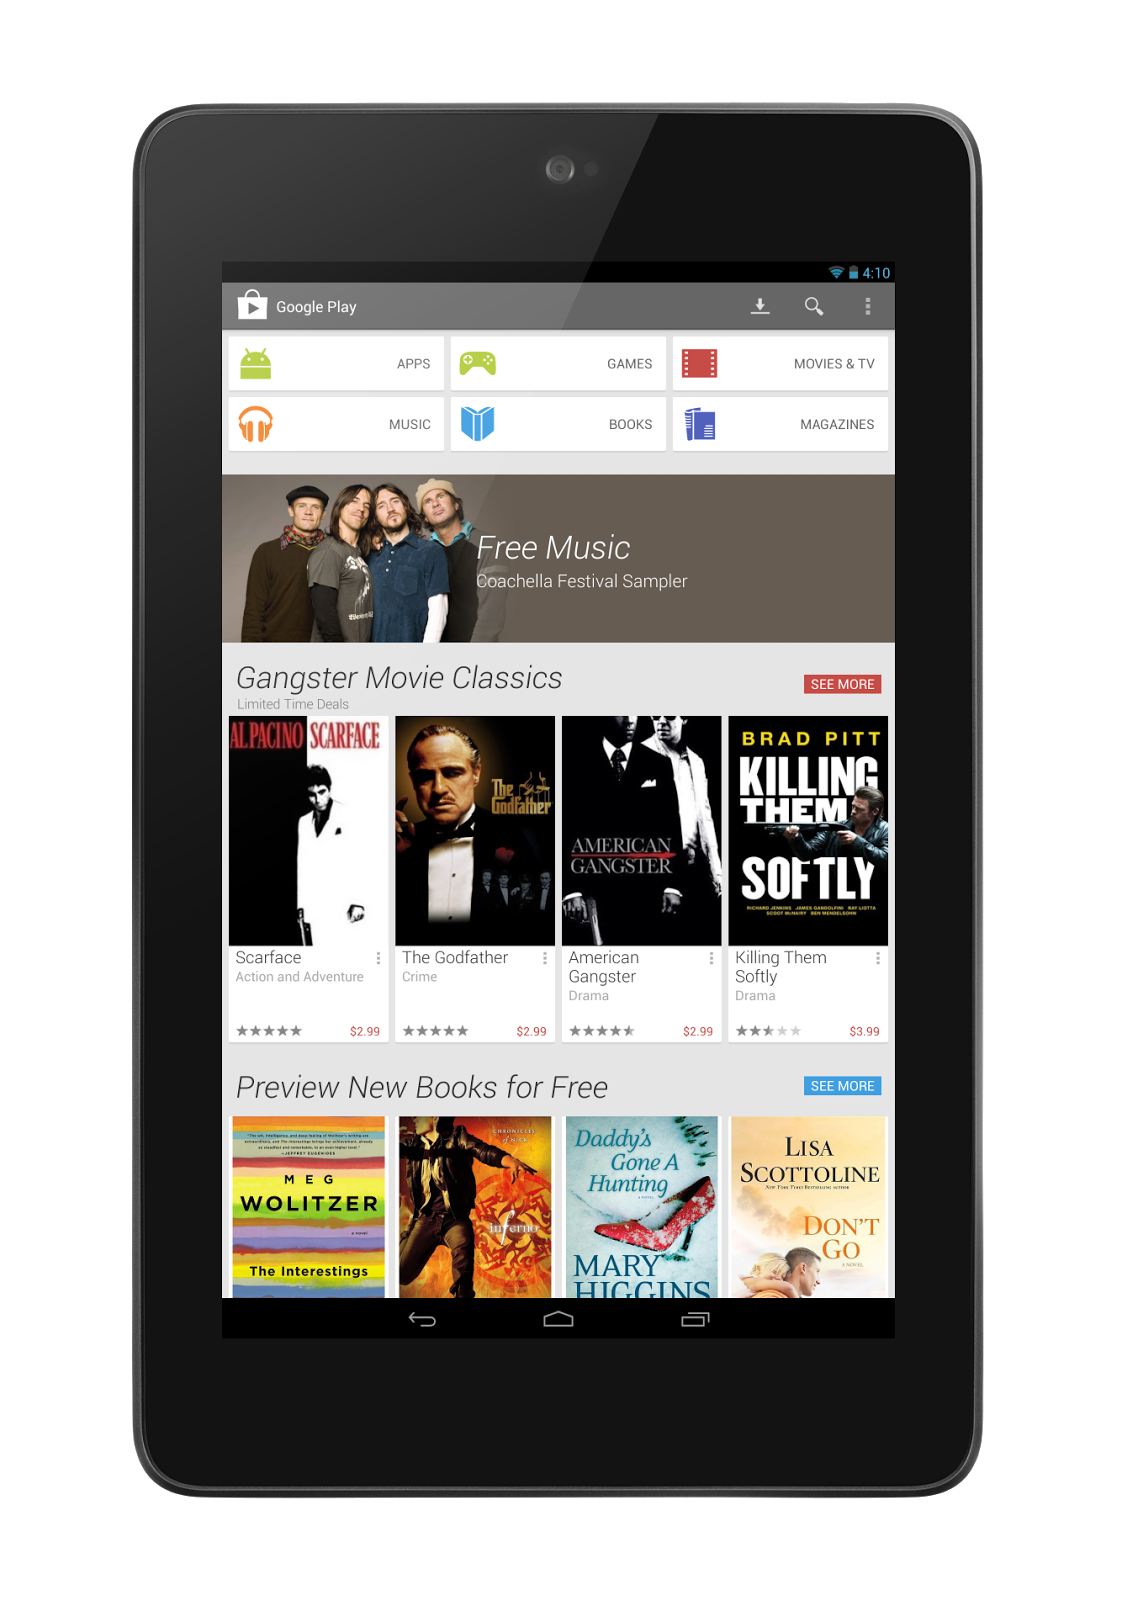 Google Play Apk Download For Android Tablet